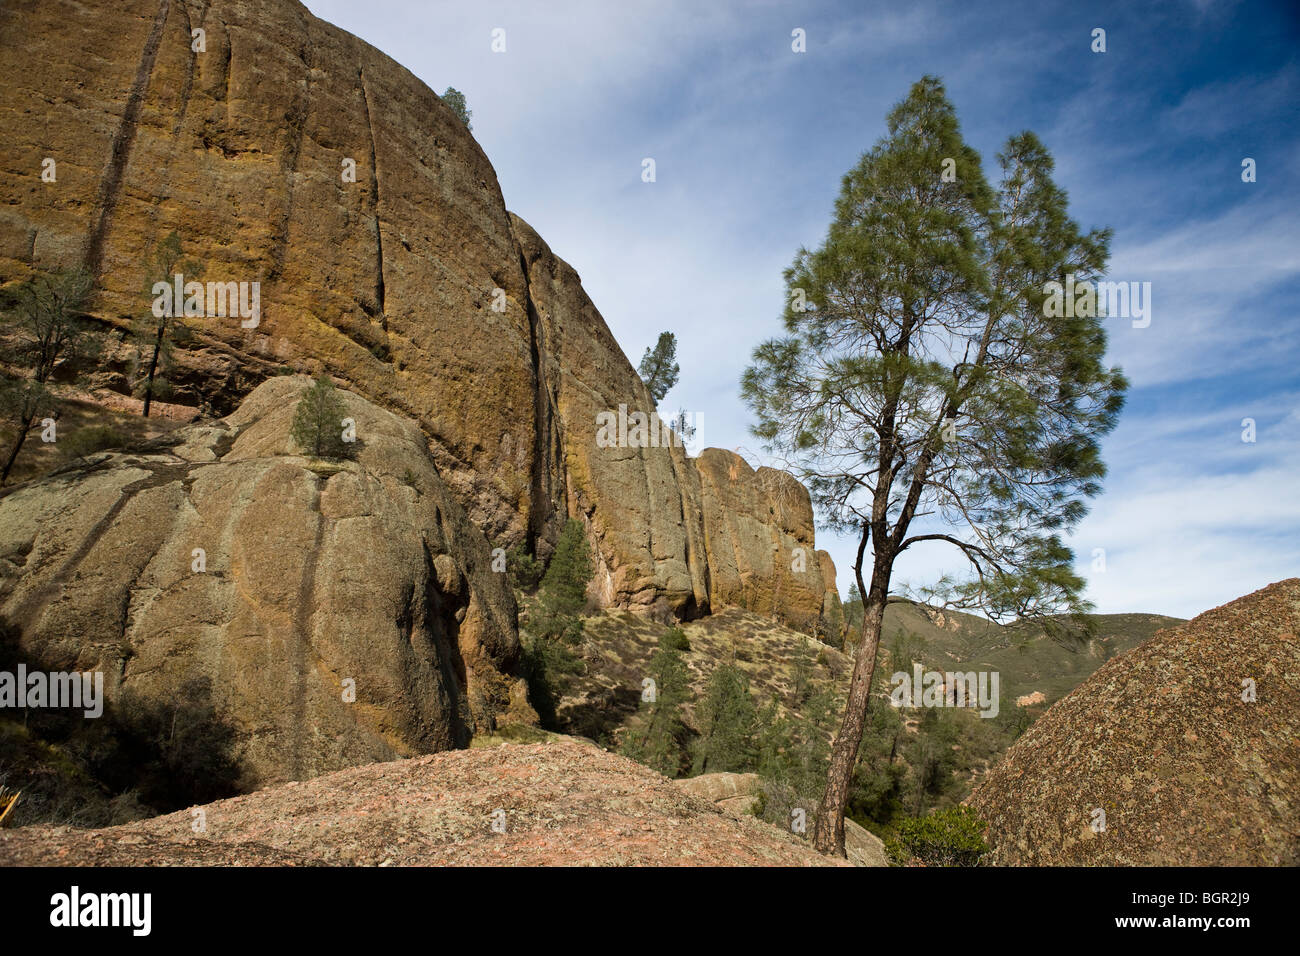 Vertical rock faces along the Balconies Cliffs Trail, Pinnacles National Monument, California, United States of America Stock Photo